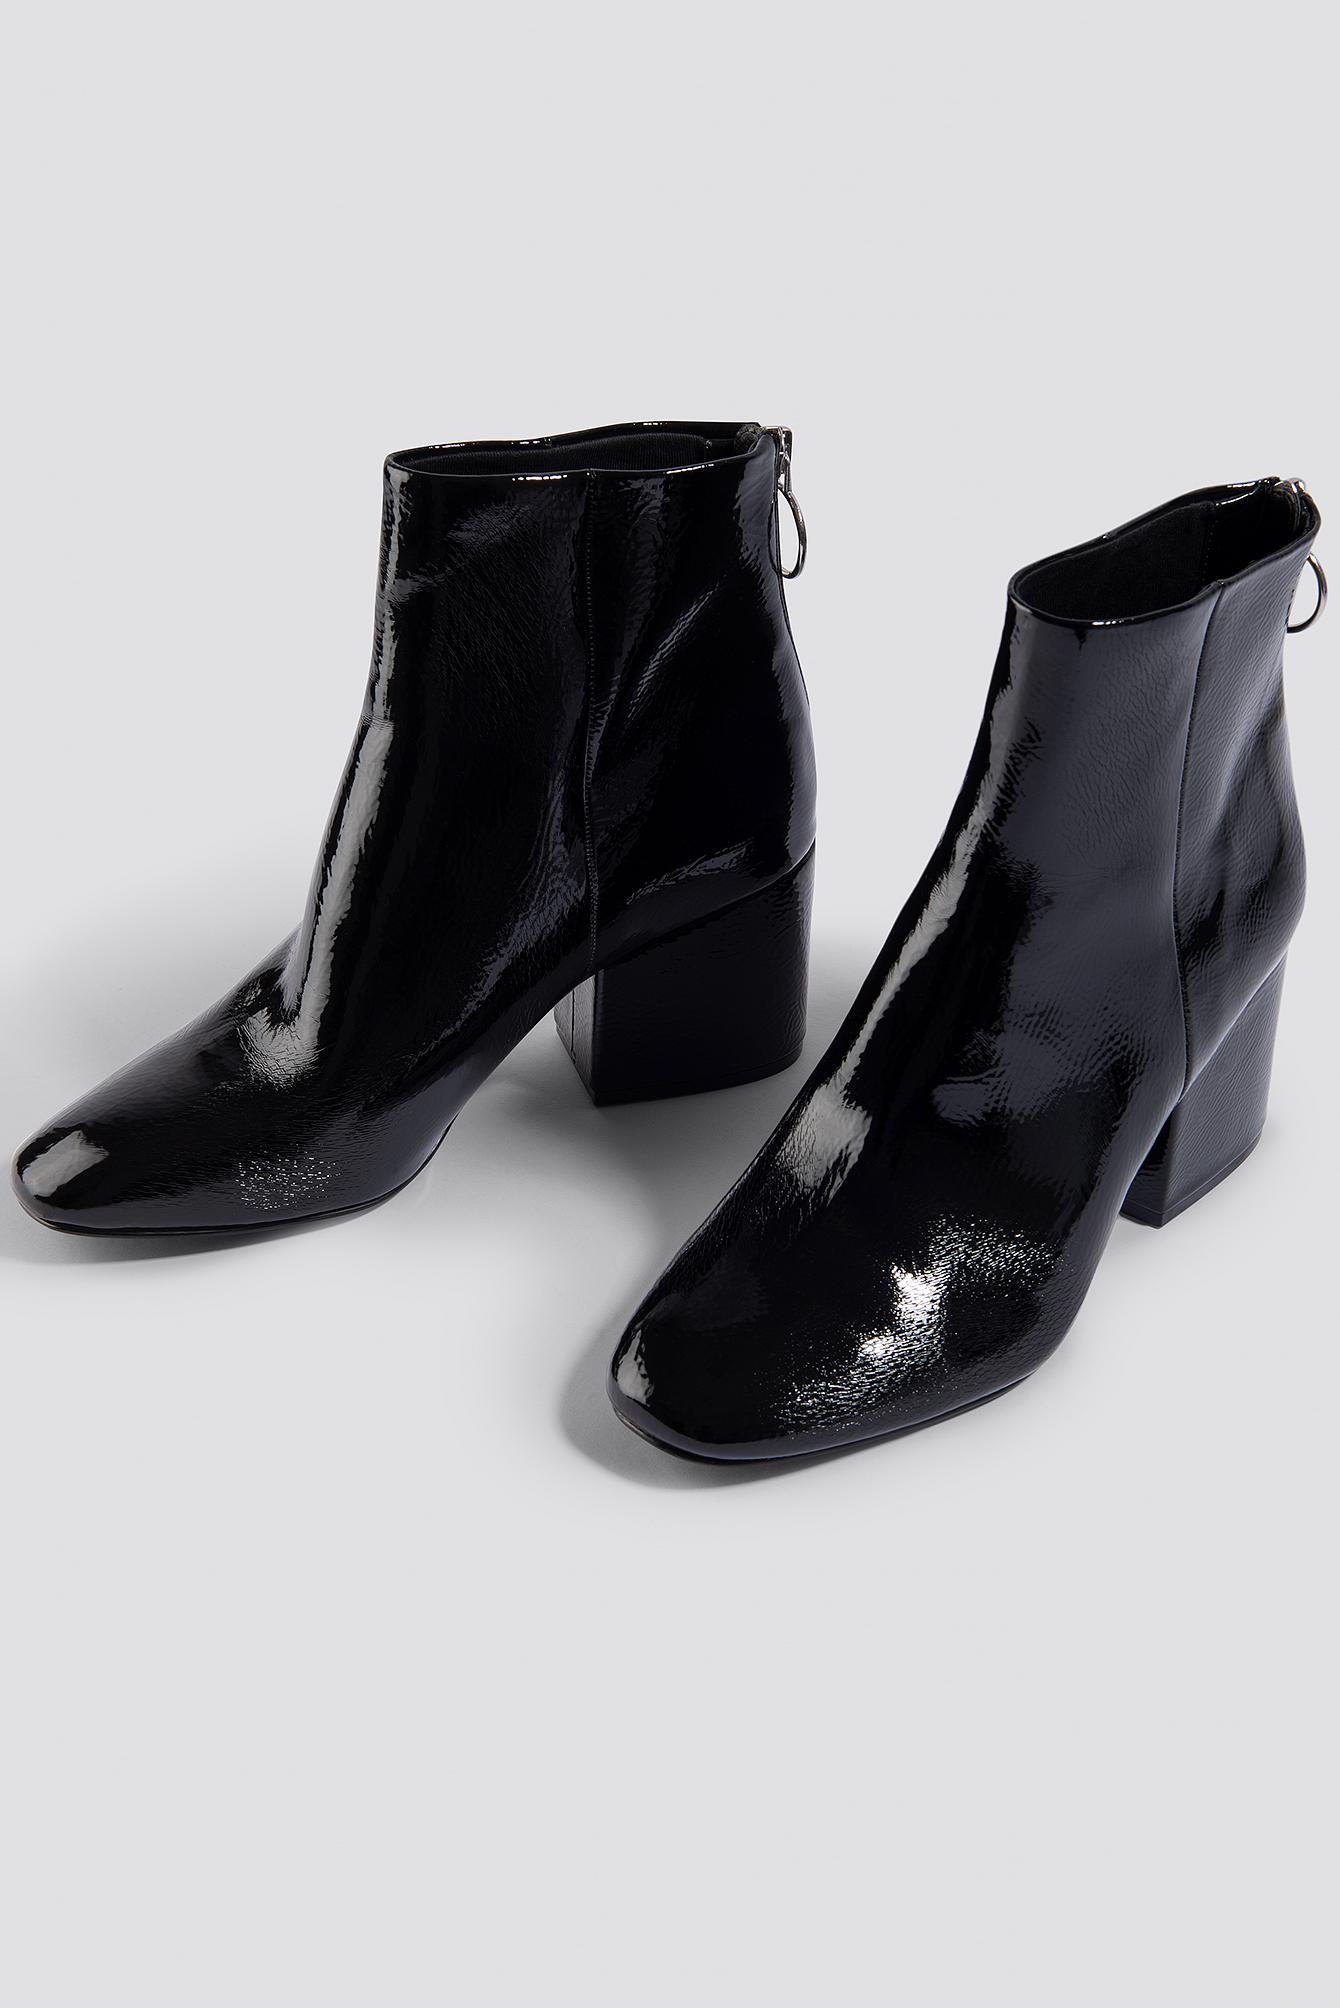 steve madden patent leather boots